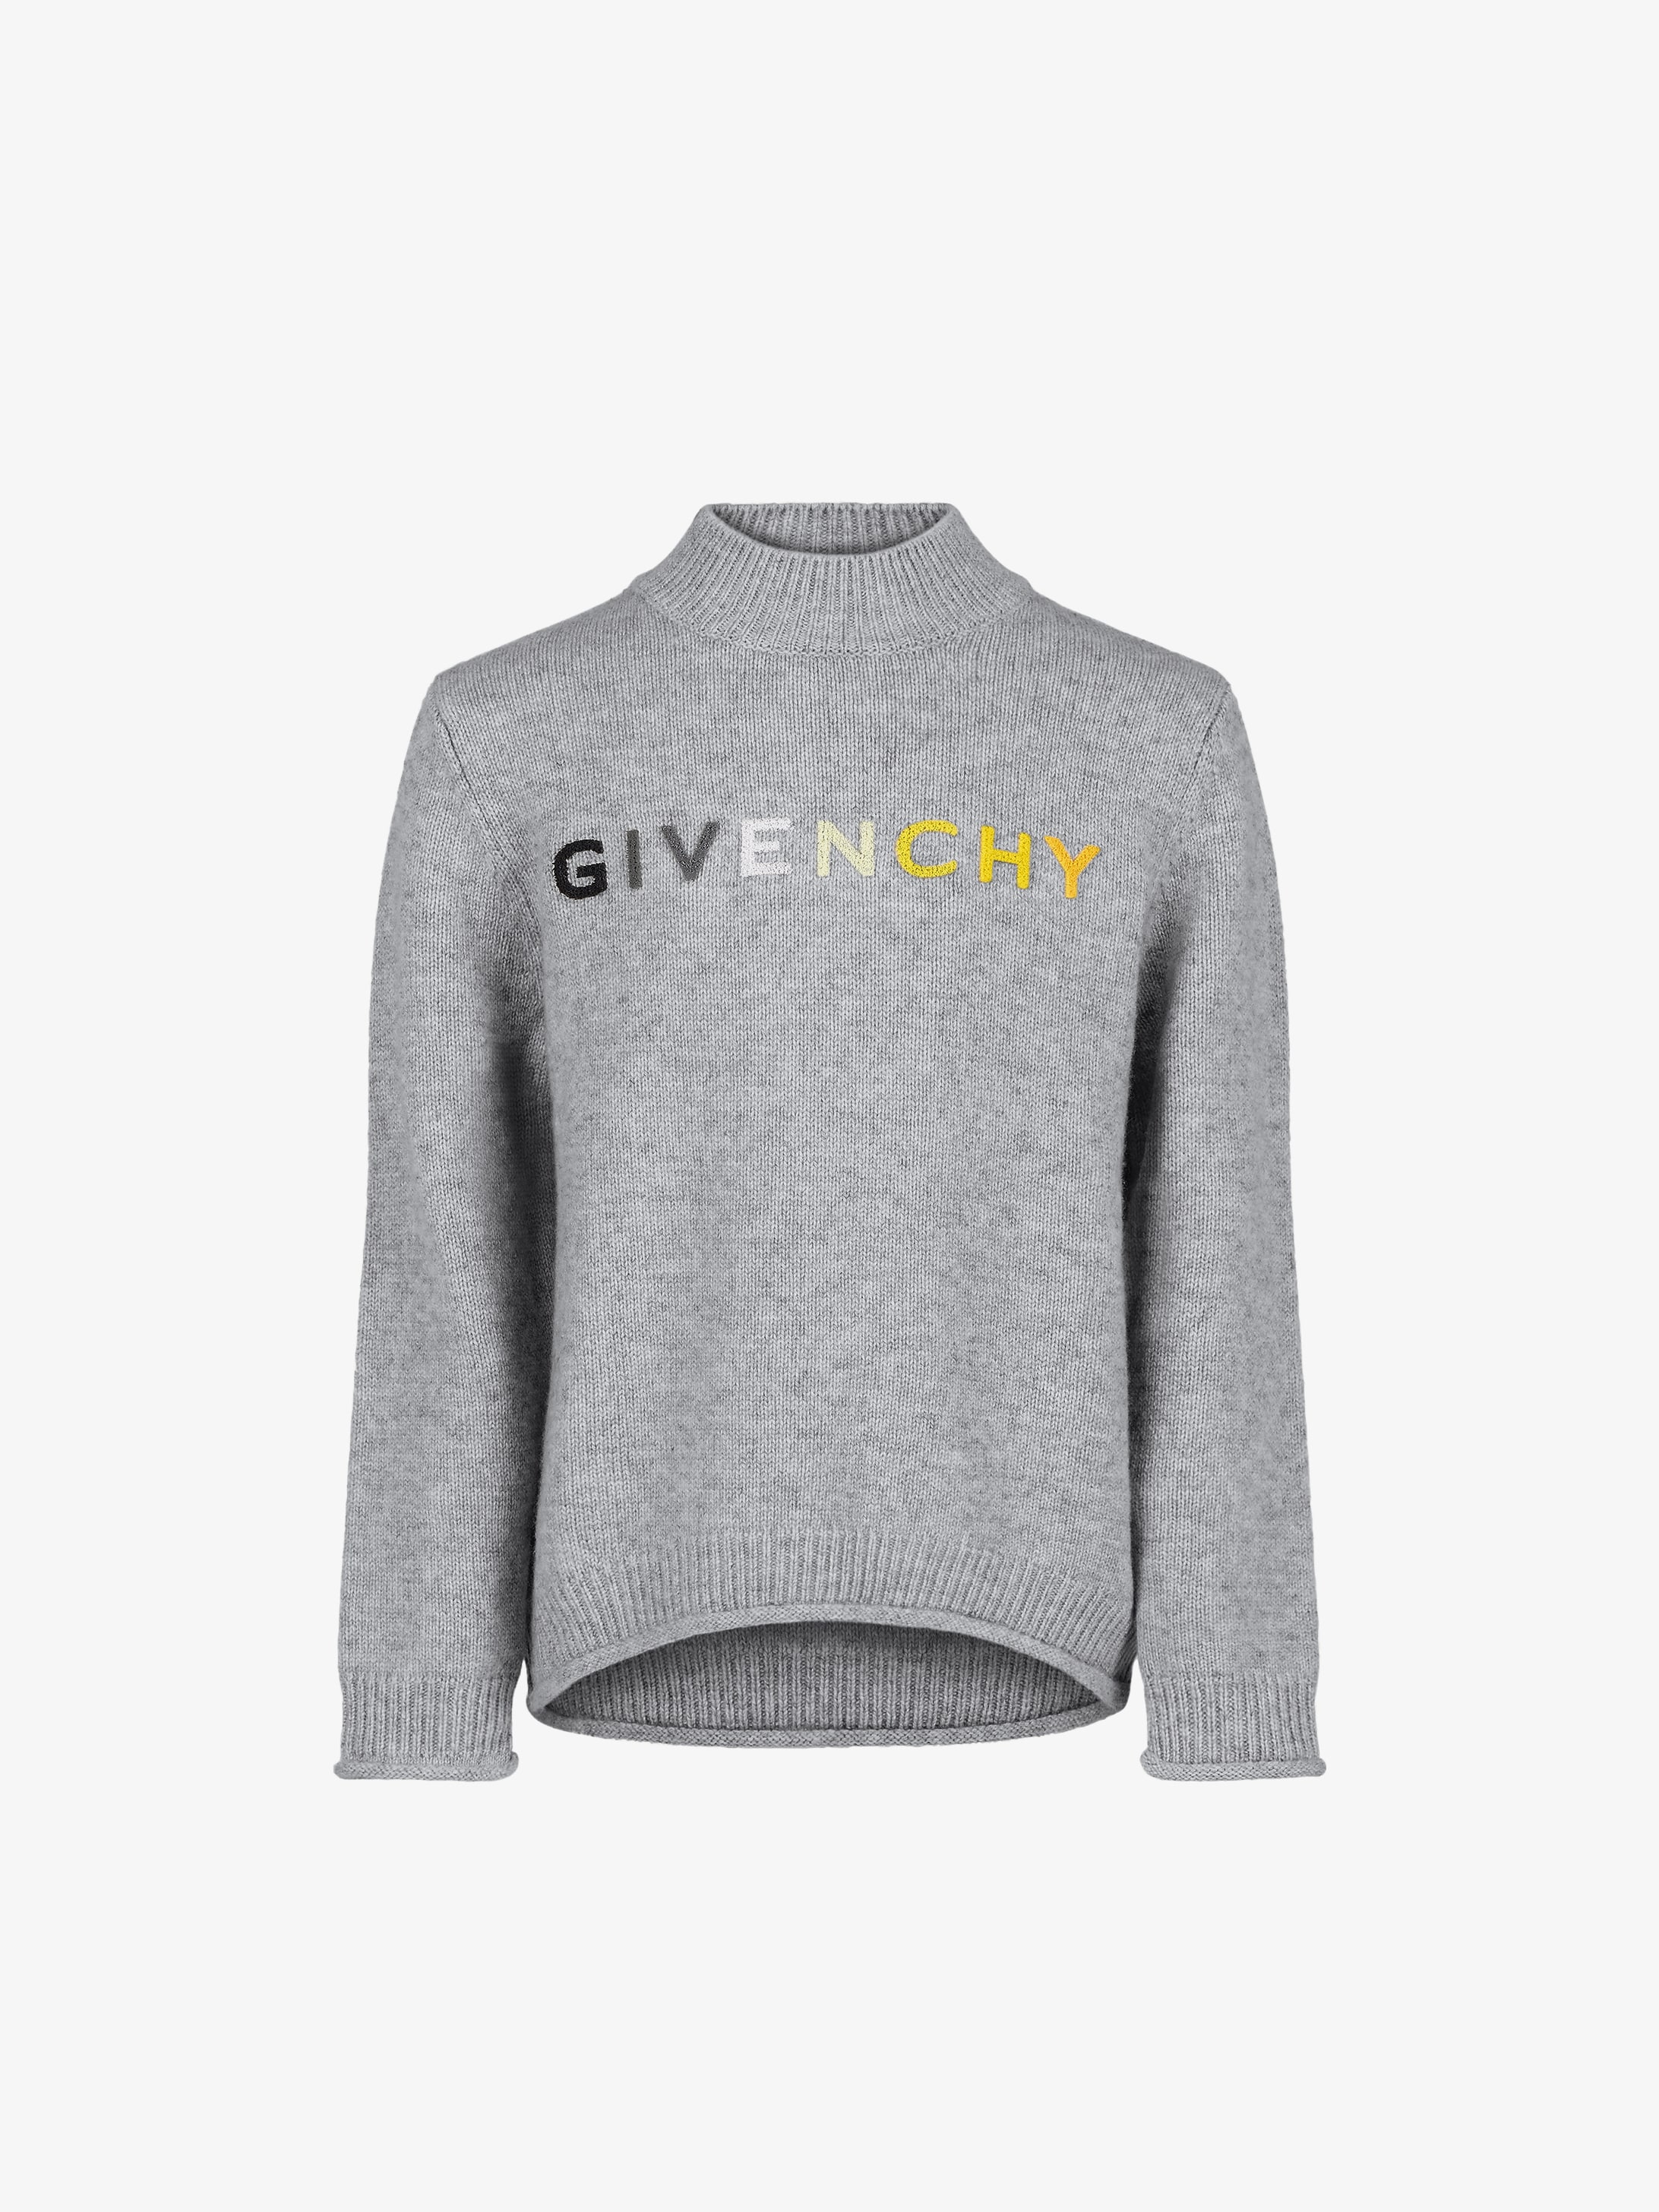 white givenchy sweater